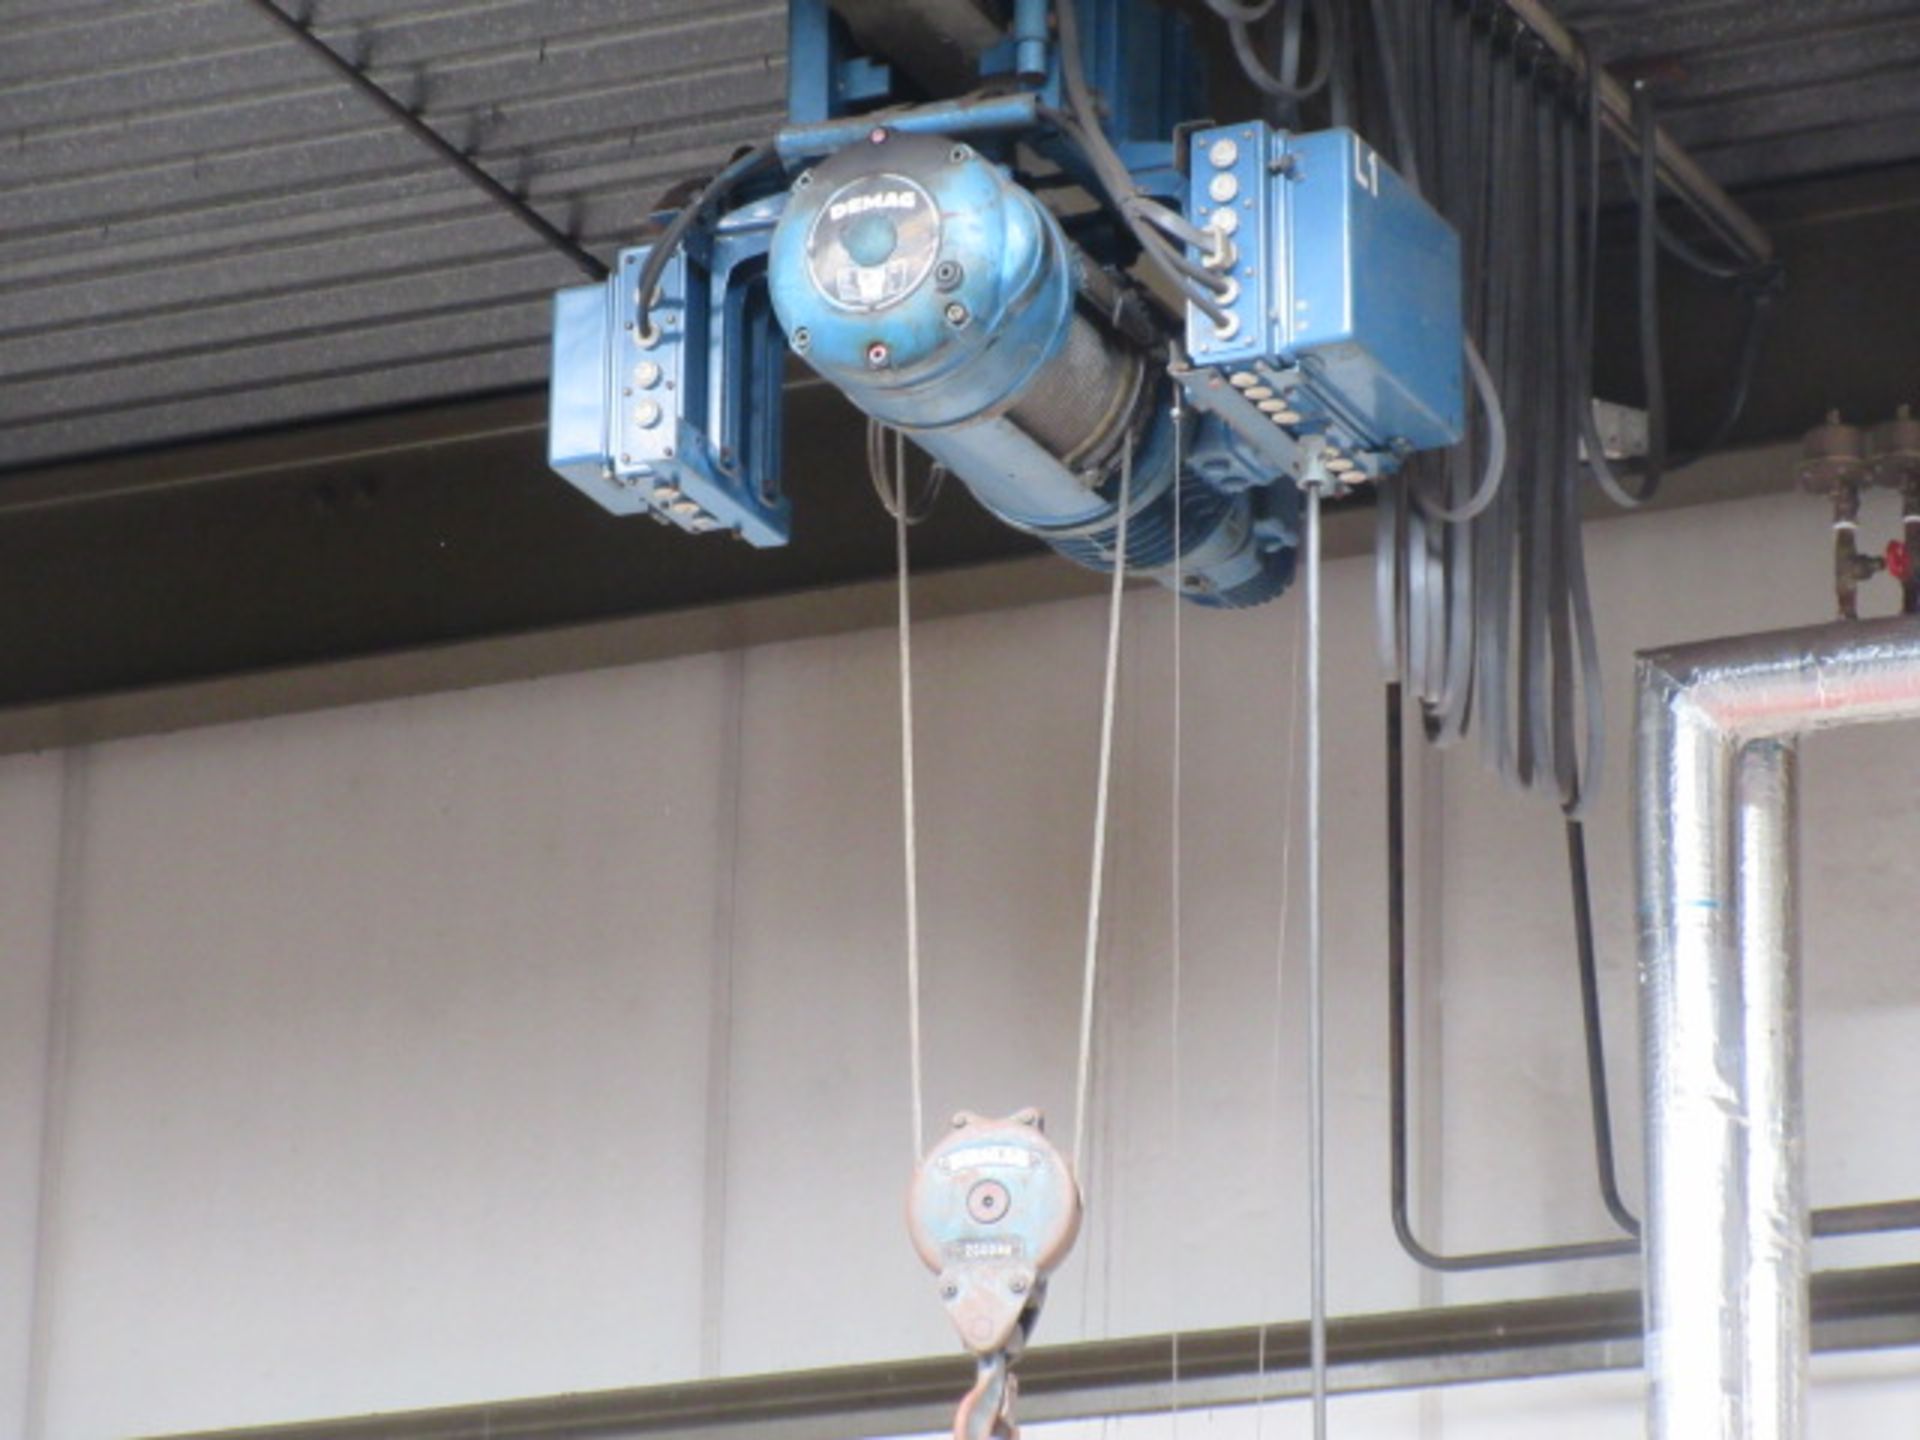 Demag crane hoist 2000kg capacity, under slung wire rope hoist, powered carriage and pendant control